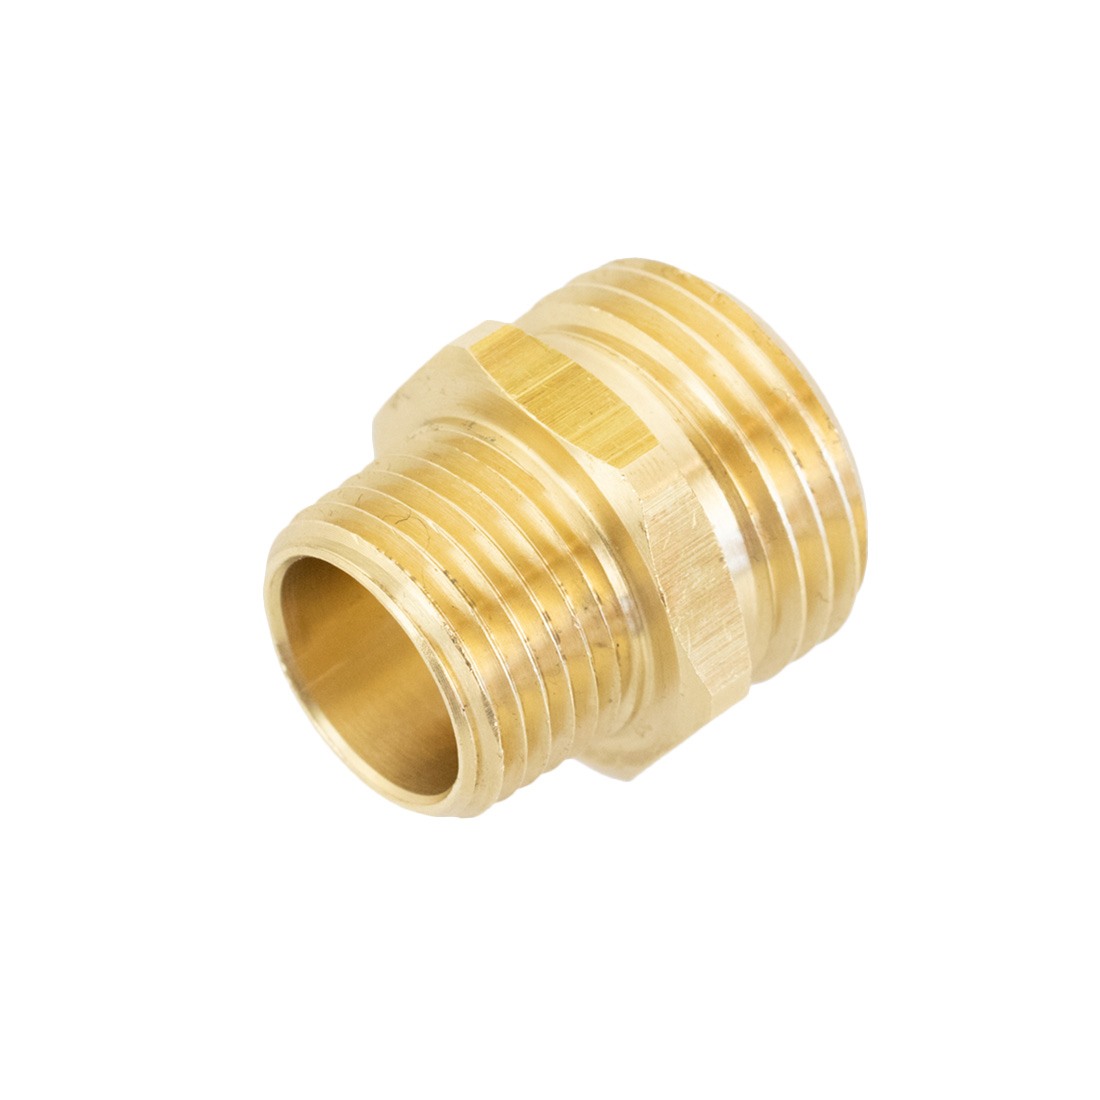 PWP Brass Fitting - Garden Hose Male x 1/2 Male NPT Right View